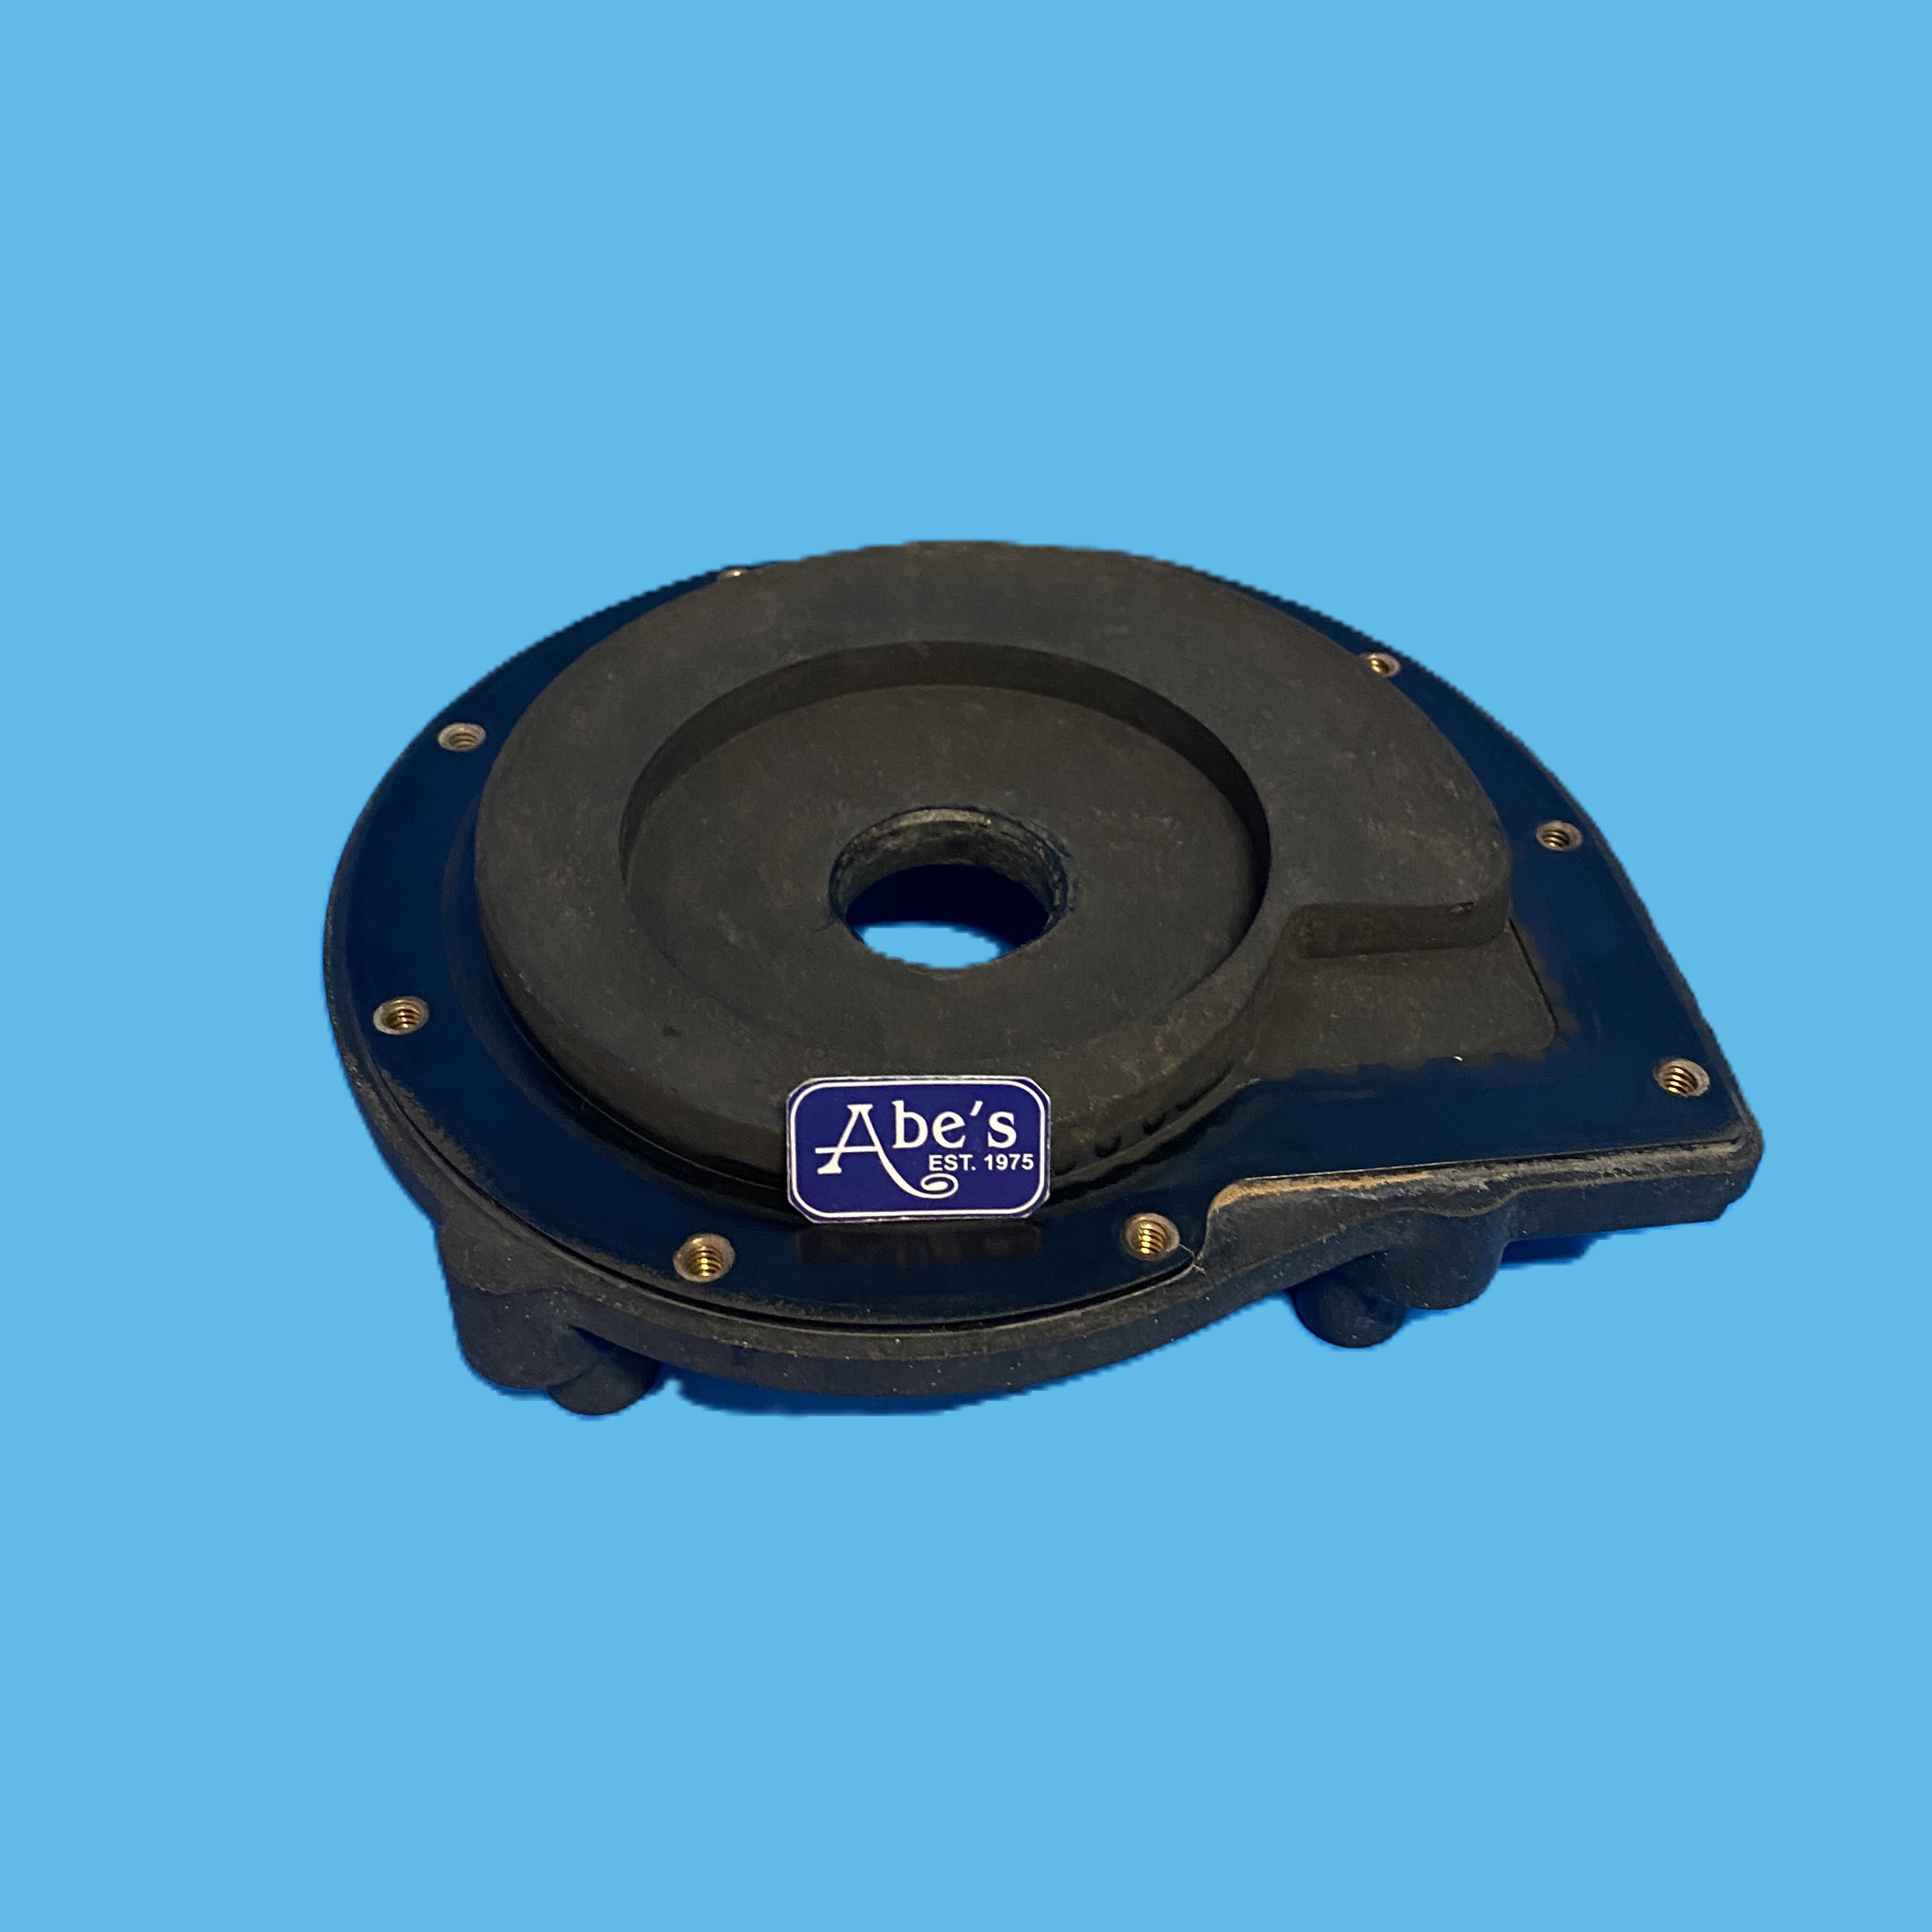 Pentair Seal Plate C1-84P2 Sta-Rite Flotec LT Series → Affordable $ 45.00 → Hard to Find Spa parts? Find Hard to Find Parts at Abe's Pools & Spas